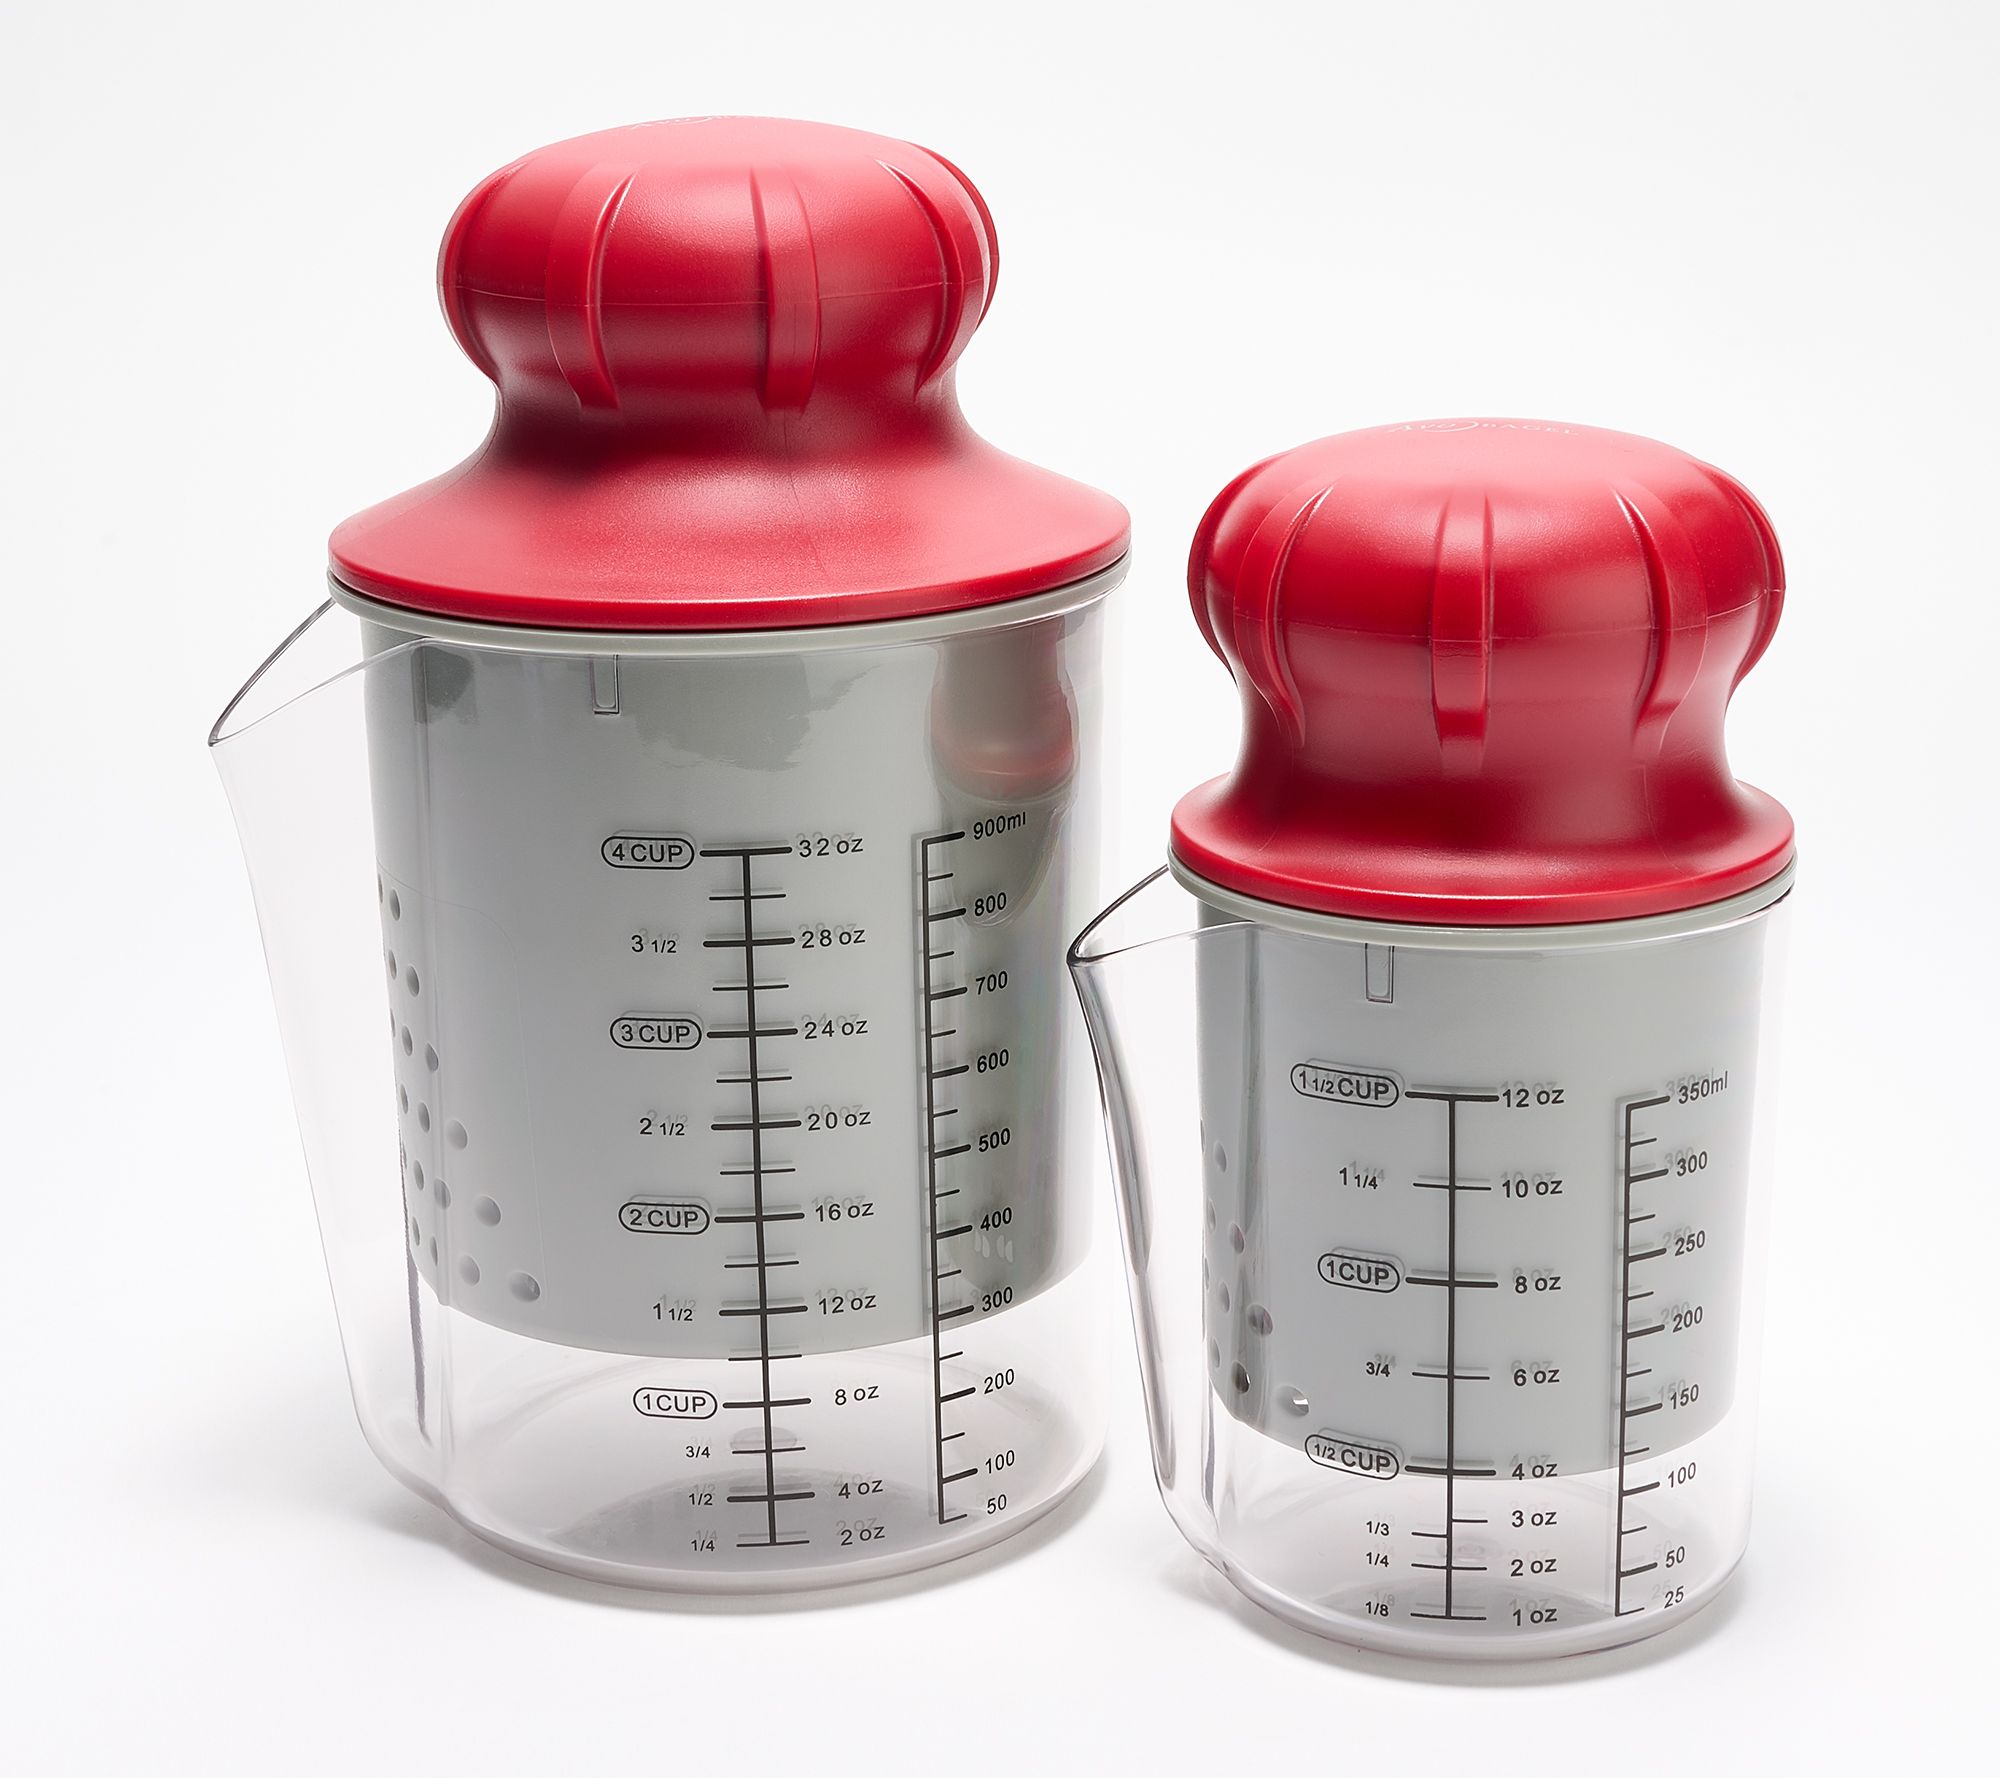 Mrs. Anderson's Baking Mini Squeeze Bottles, Set of 2